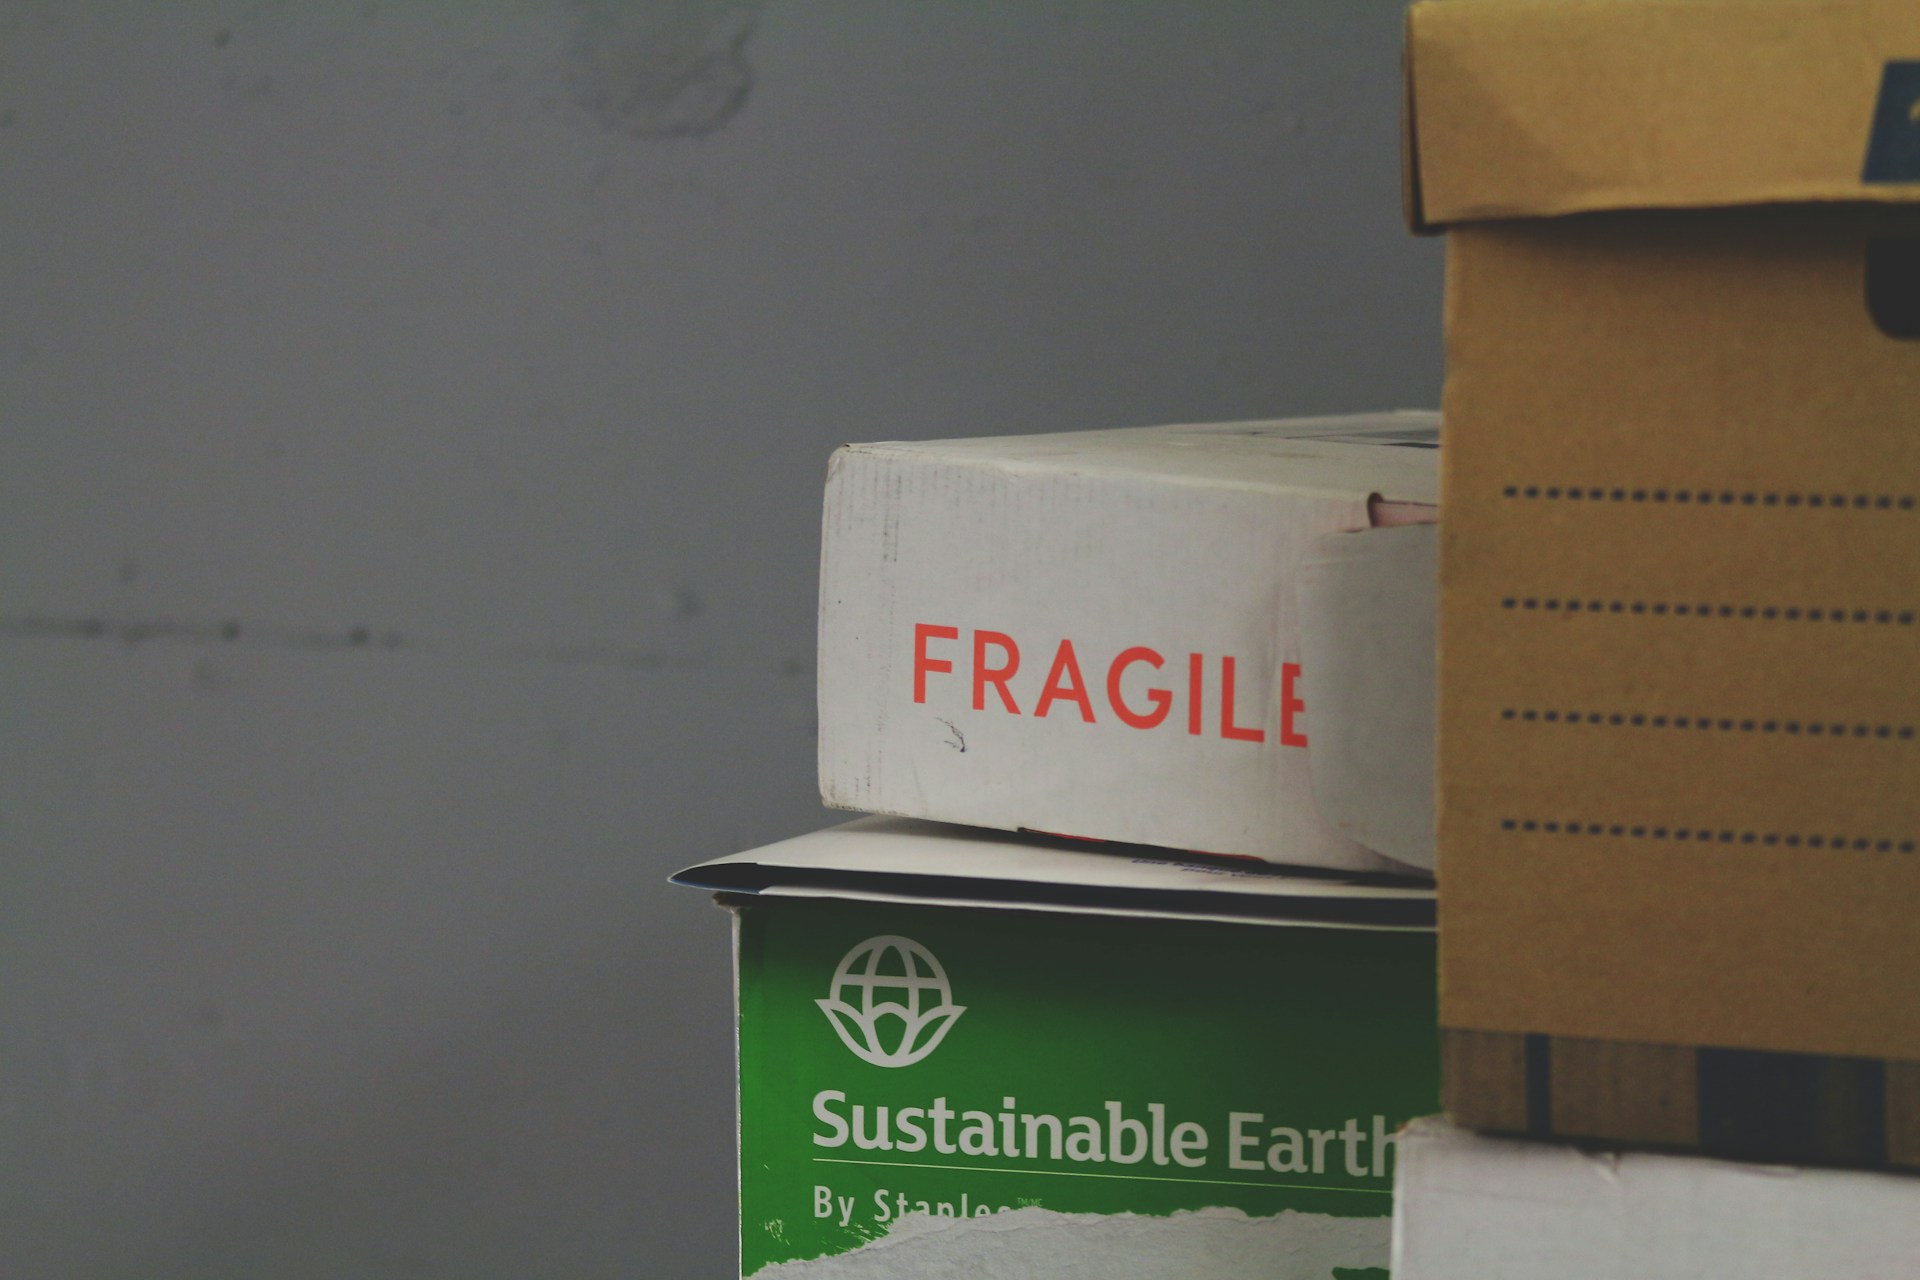 7 Creative Ways to Label Your Moving Boxes for Easy Unpacking